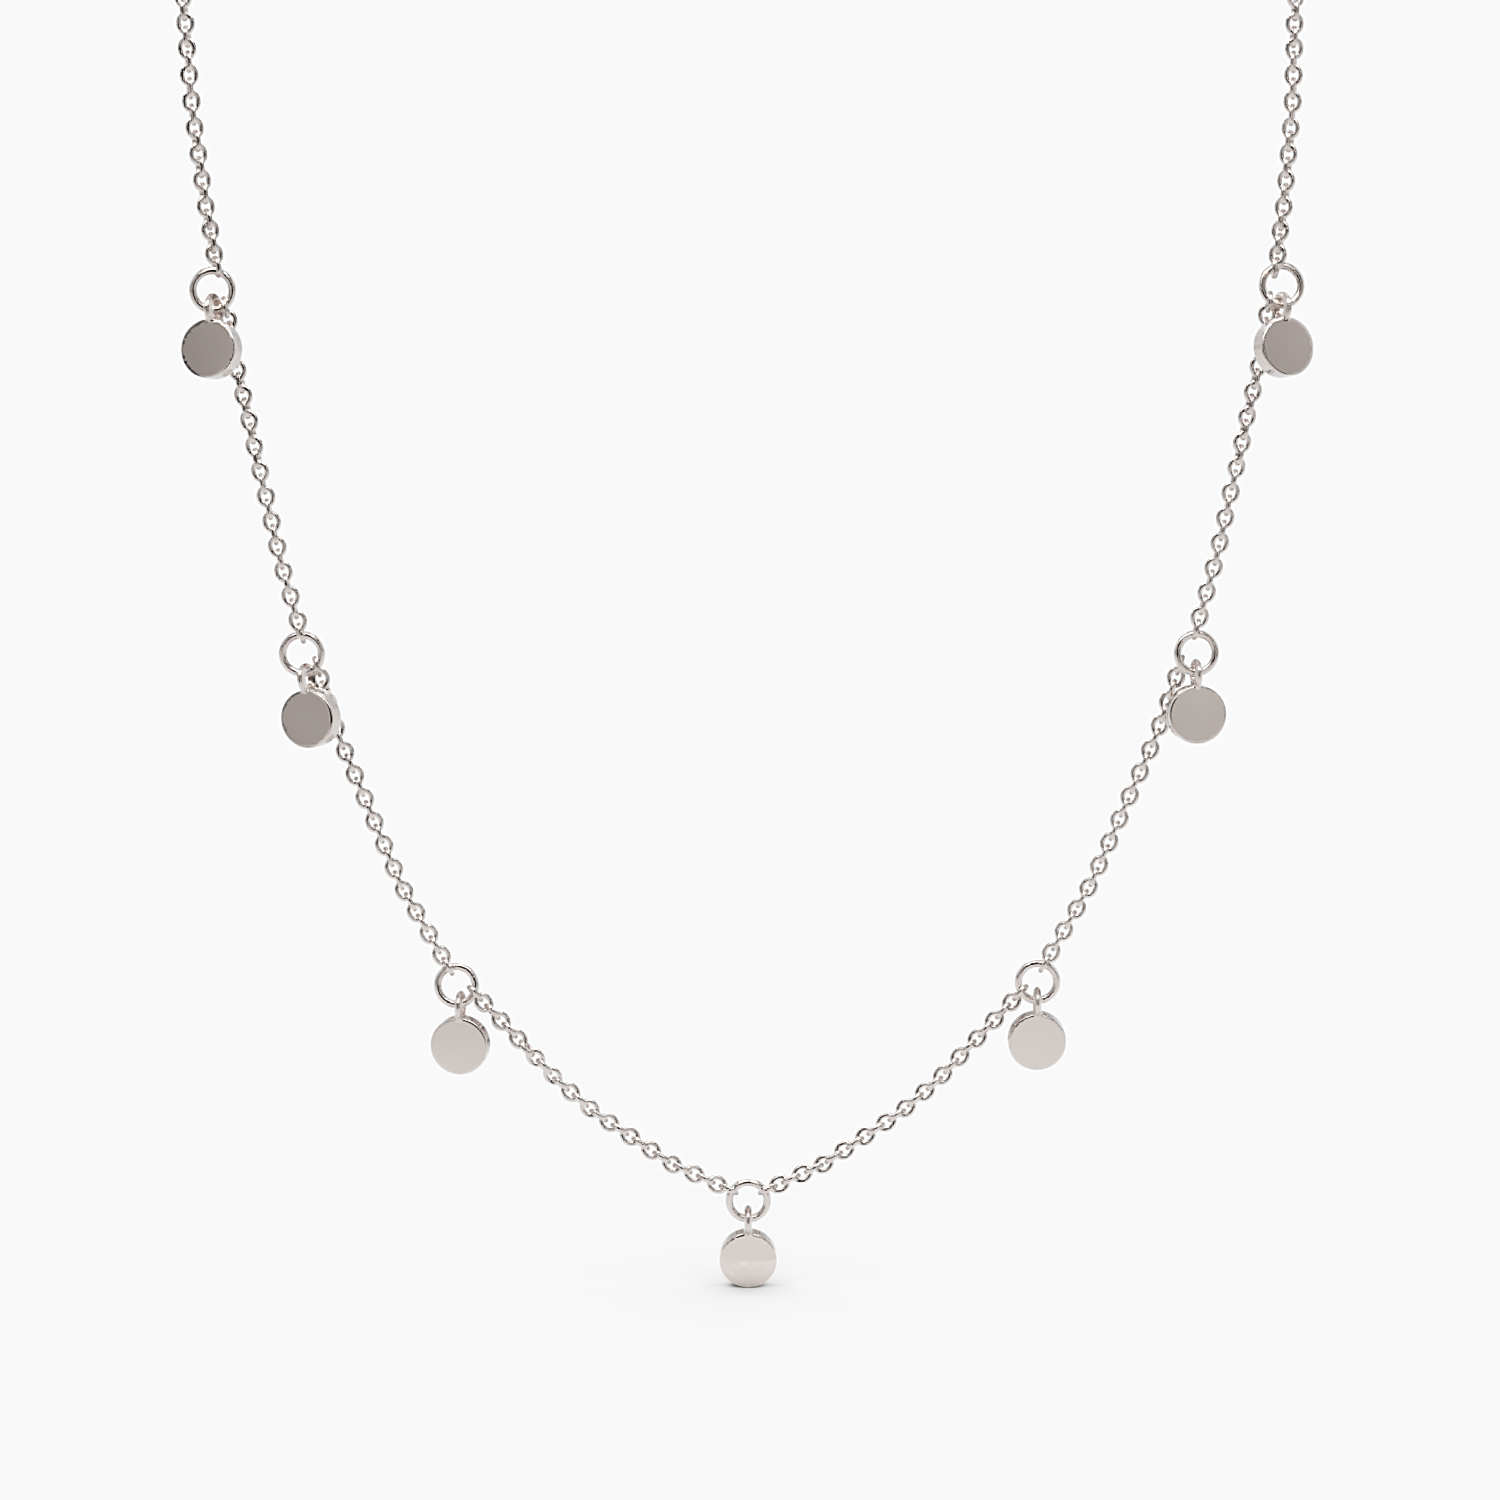 Dot Chain Necklace